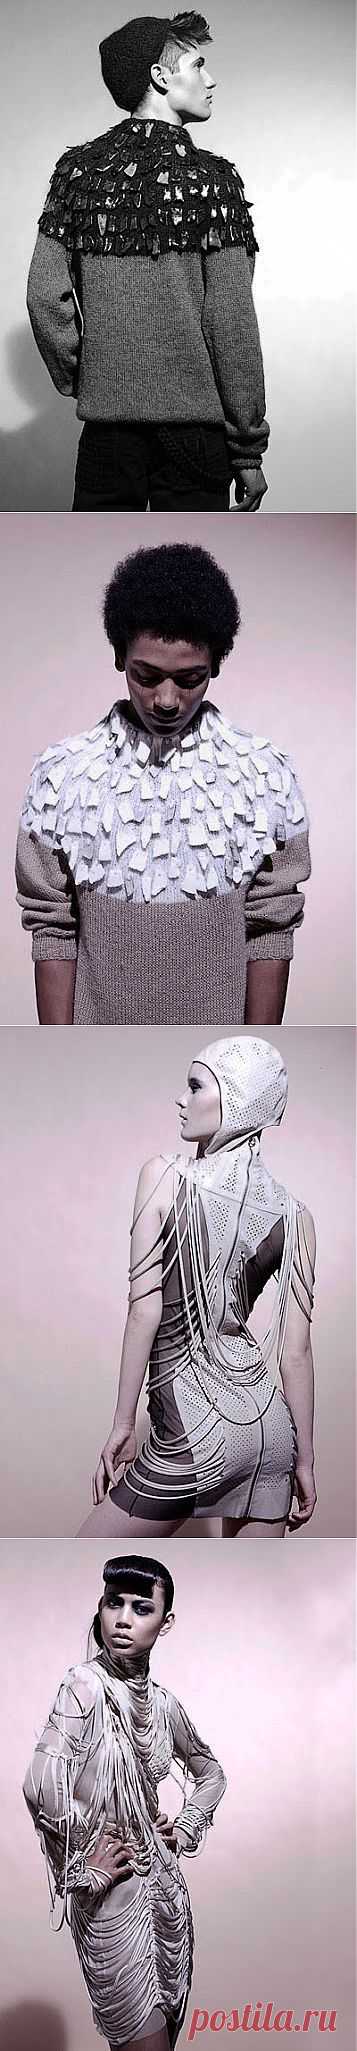 COUTE QUE COUTE: ASKH BY ANNE-SOFIE MADSEN & KATRINE HEDEGAARD AUTUMN/WINTER 2010/11 MEN’S & WOMEN’S COLLECTION